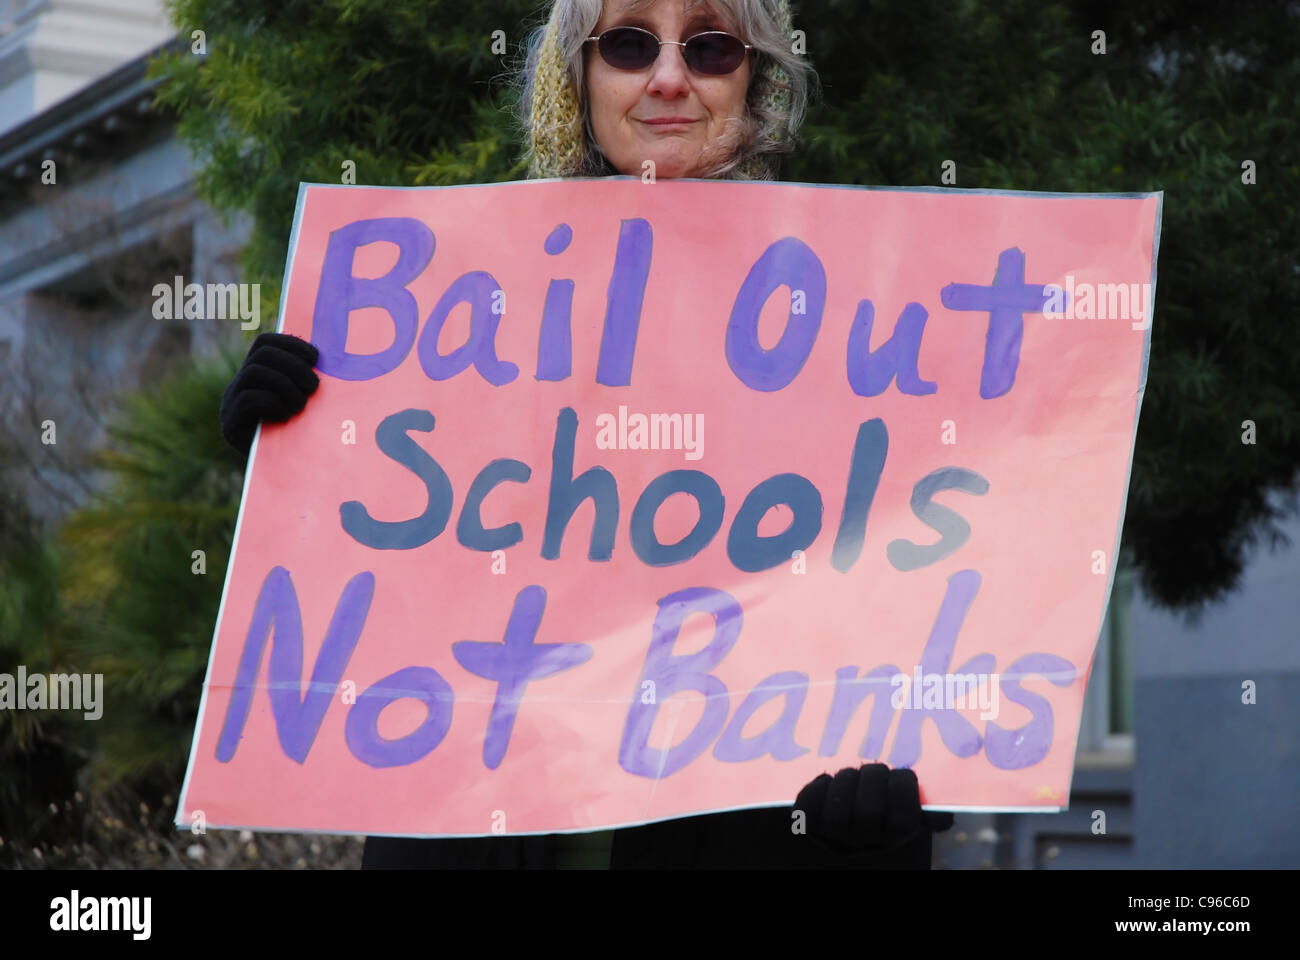 Education supporter carries sign reading 'Bail Out Schools Not Banks' Stock Photo